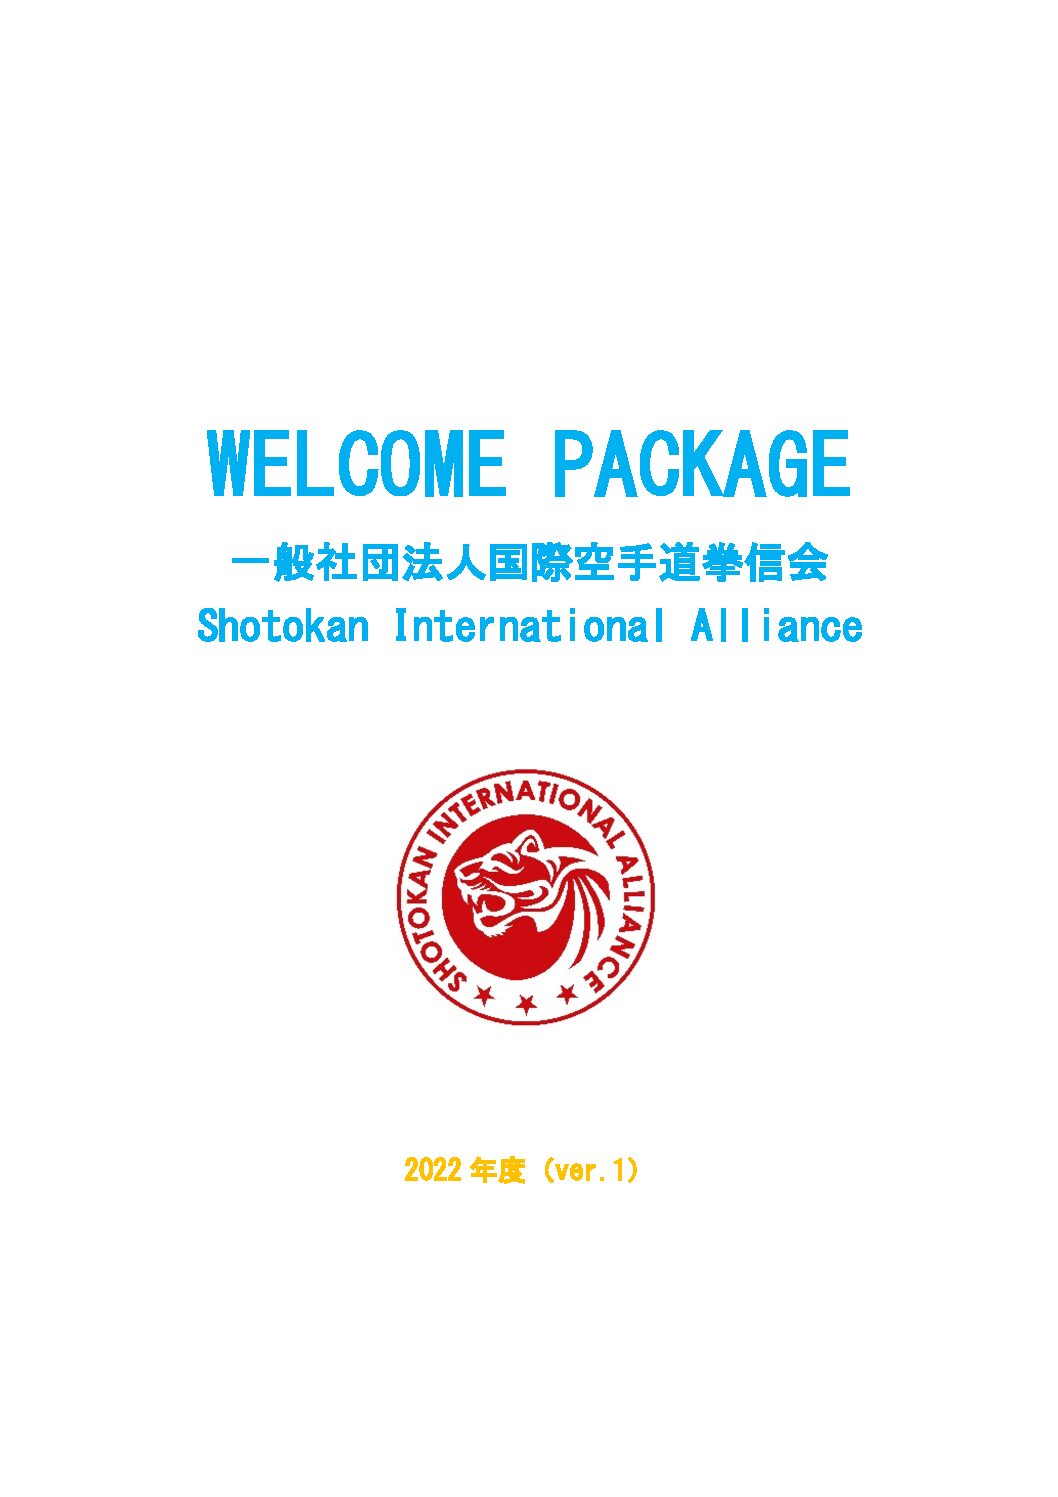 WELCOME-PACKAGE_ver2022_ver1表紙